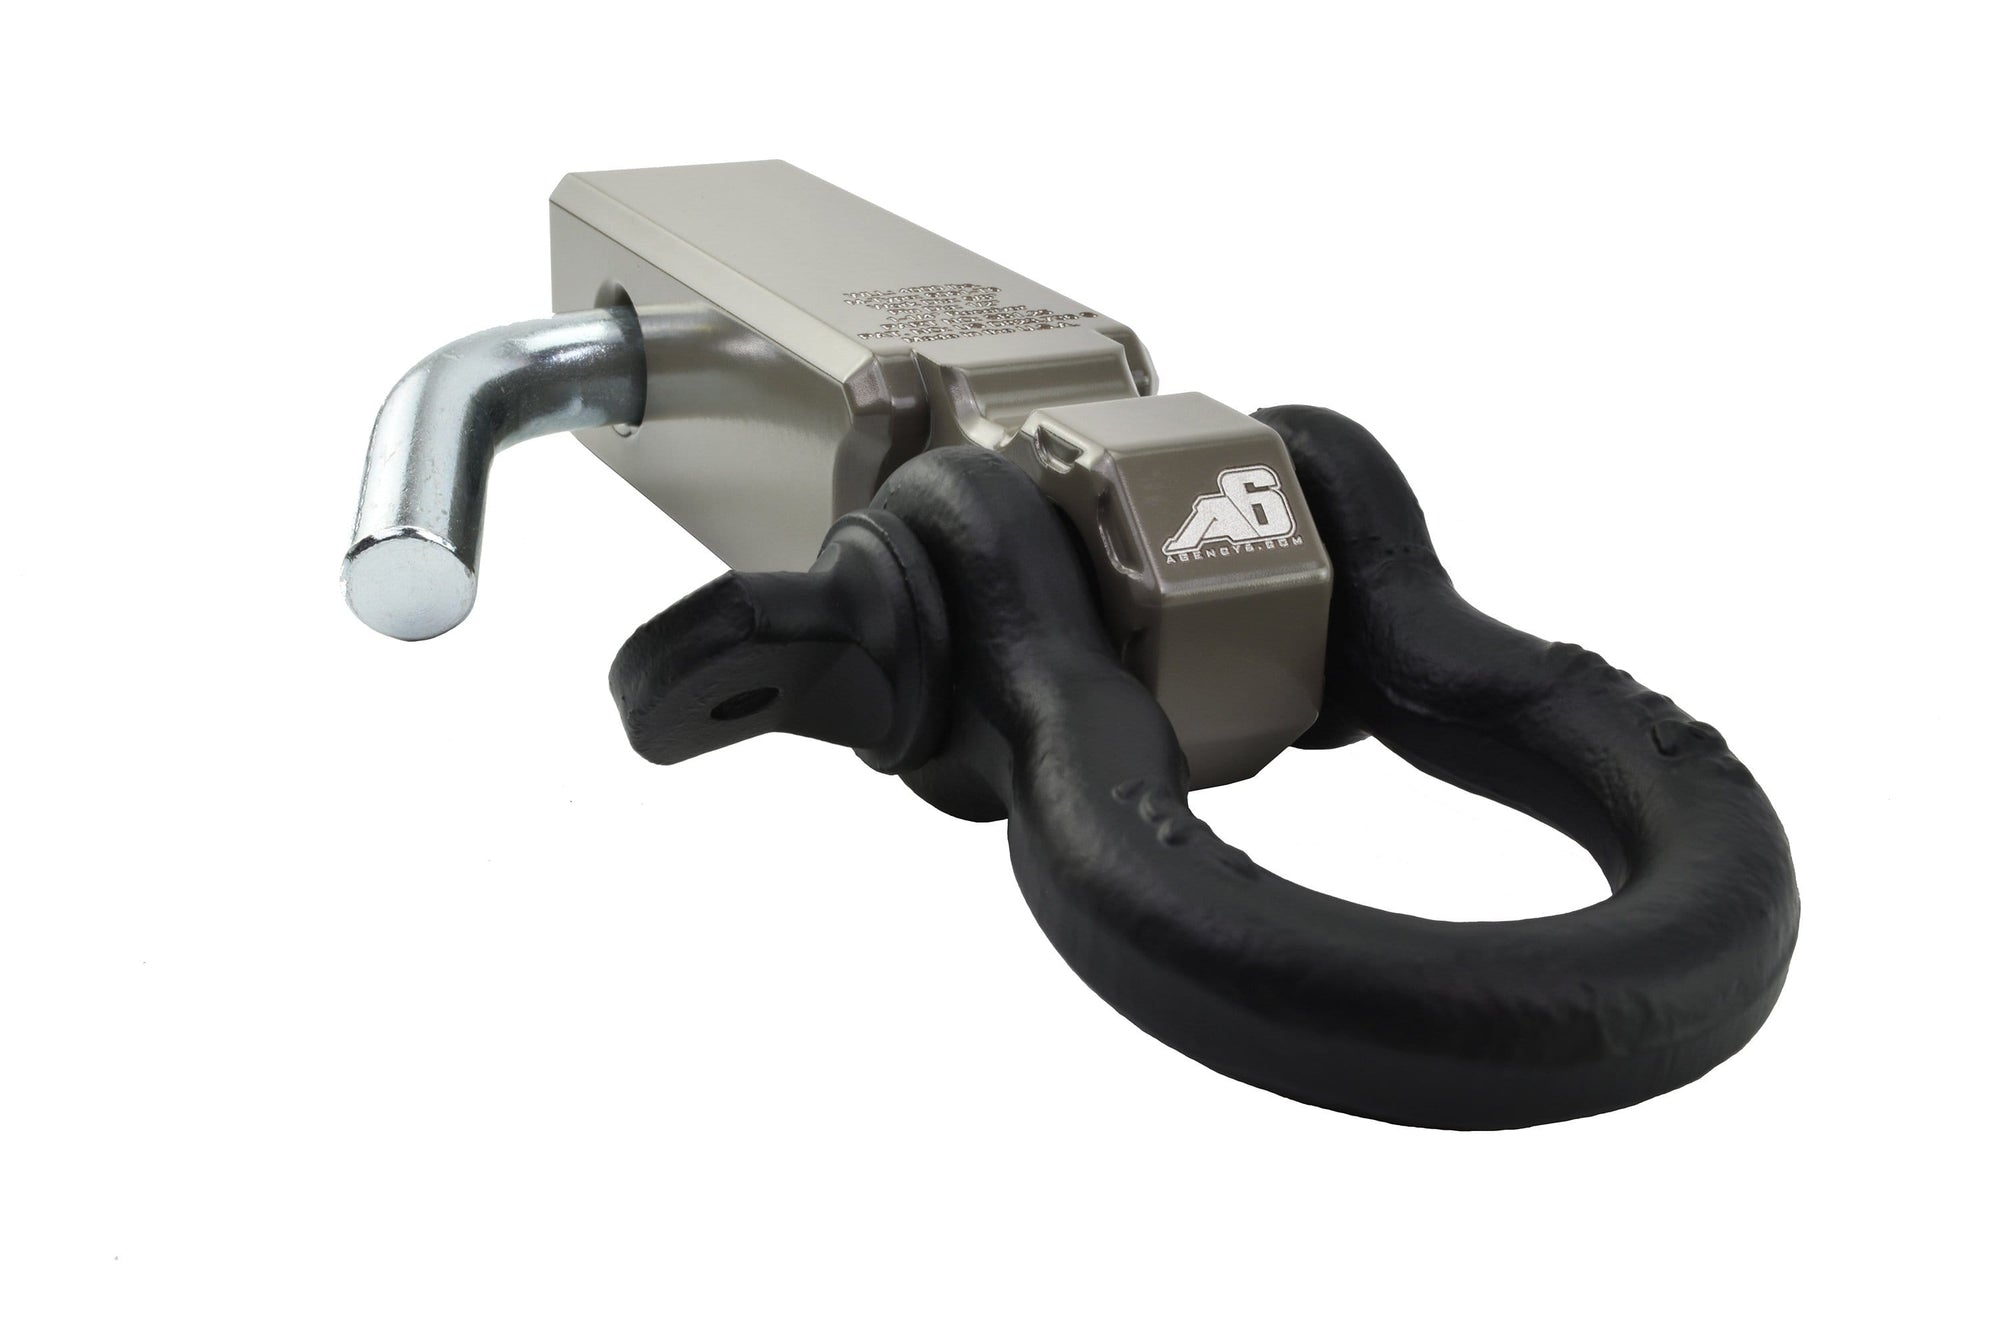 Shackle Block 1.25" Assembly - Earth Grey